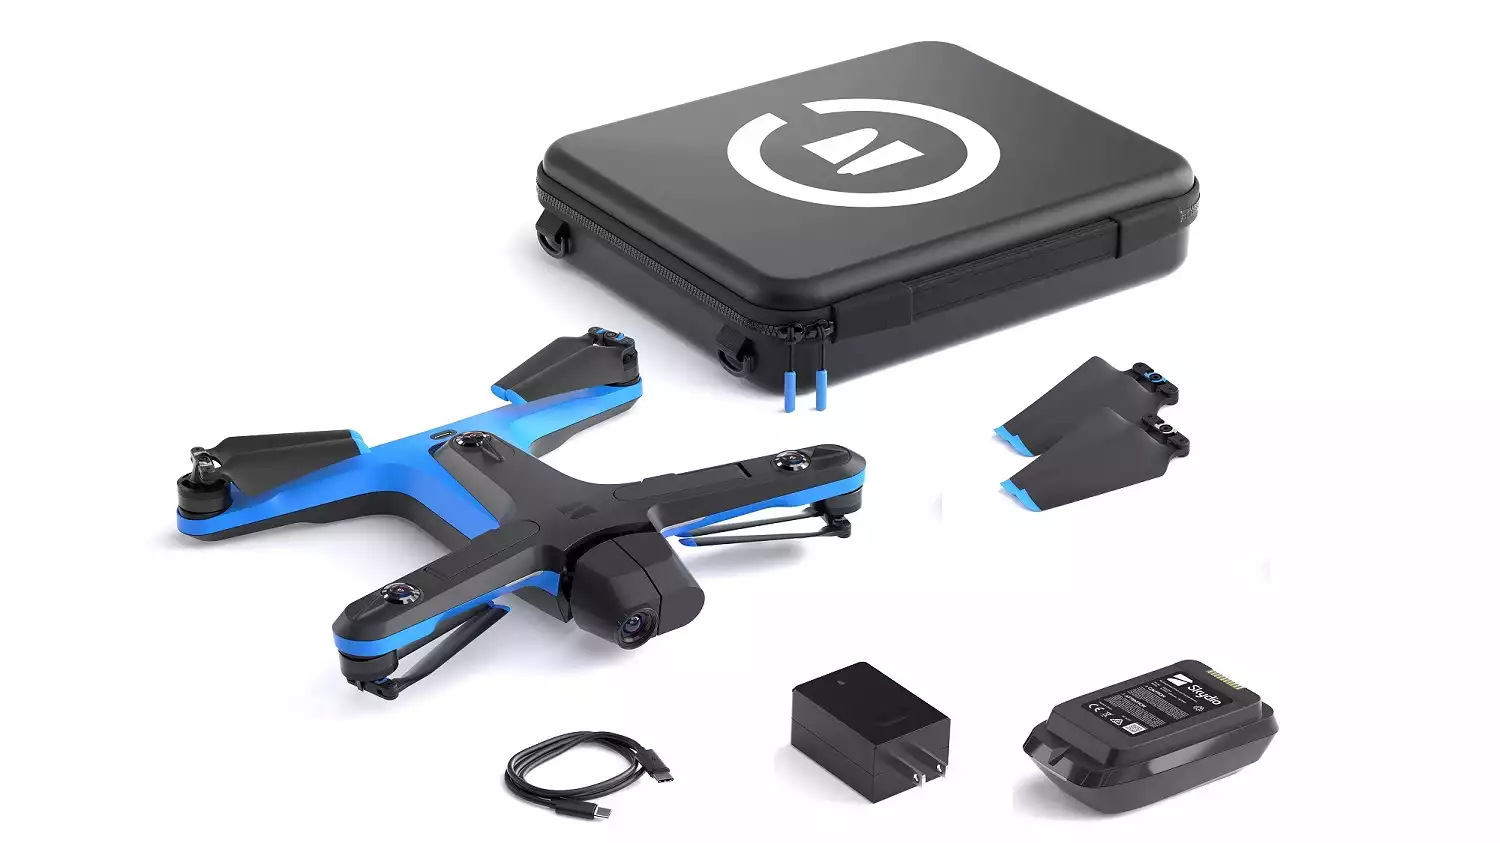 Overview of the Skydio 2+ Starter Kit